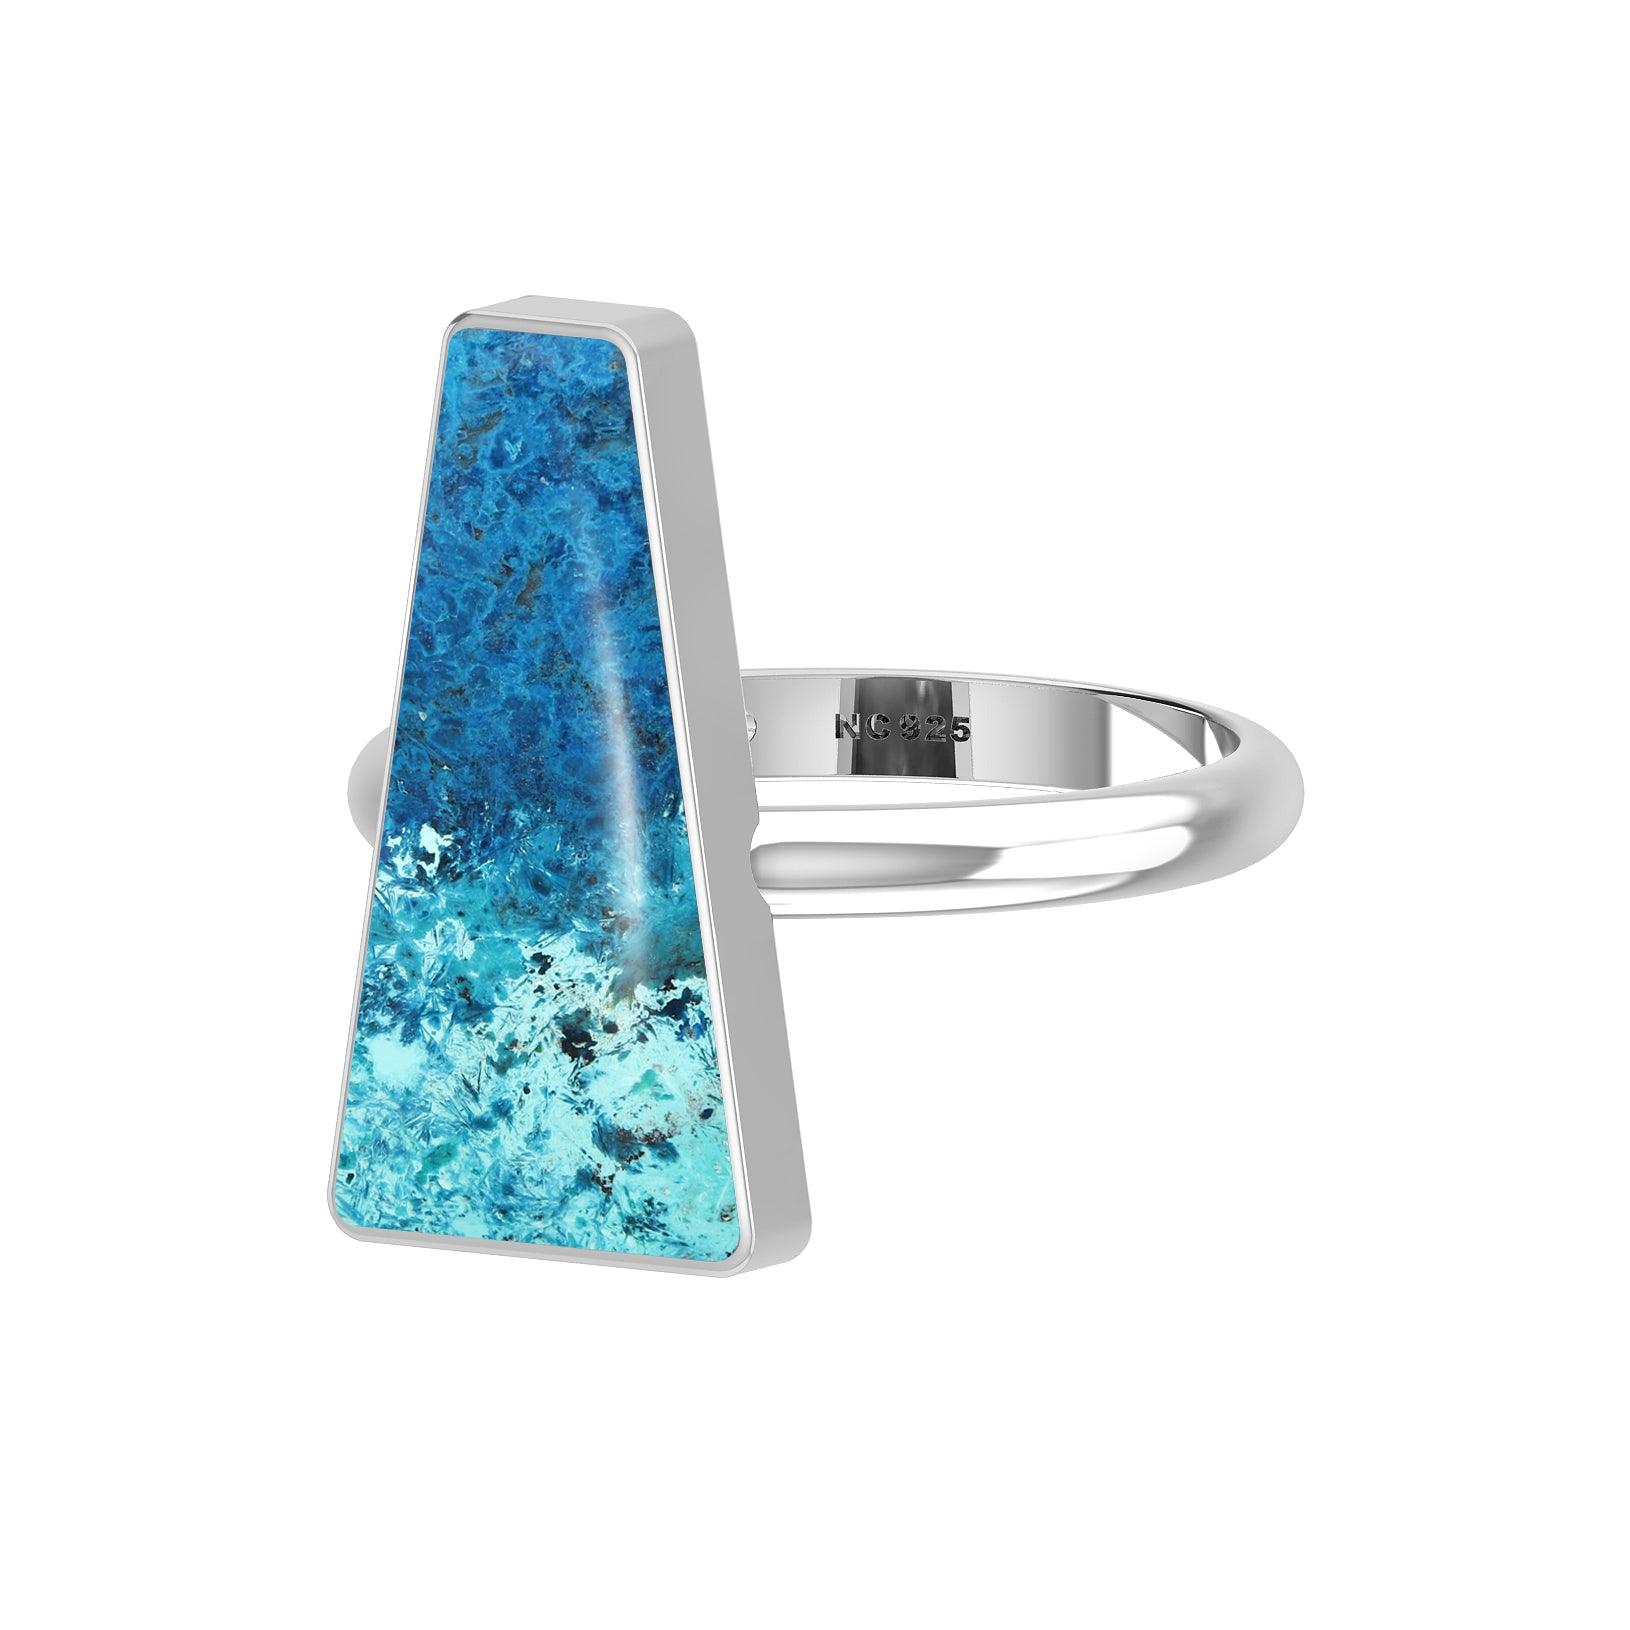 Natural Shattuckite Ring 925 Sterling Silver Bezel Set Jewelry Pack of 6 (Box 8)